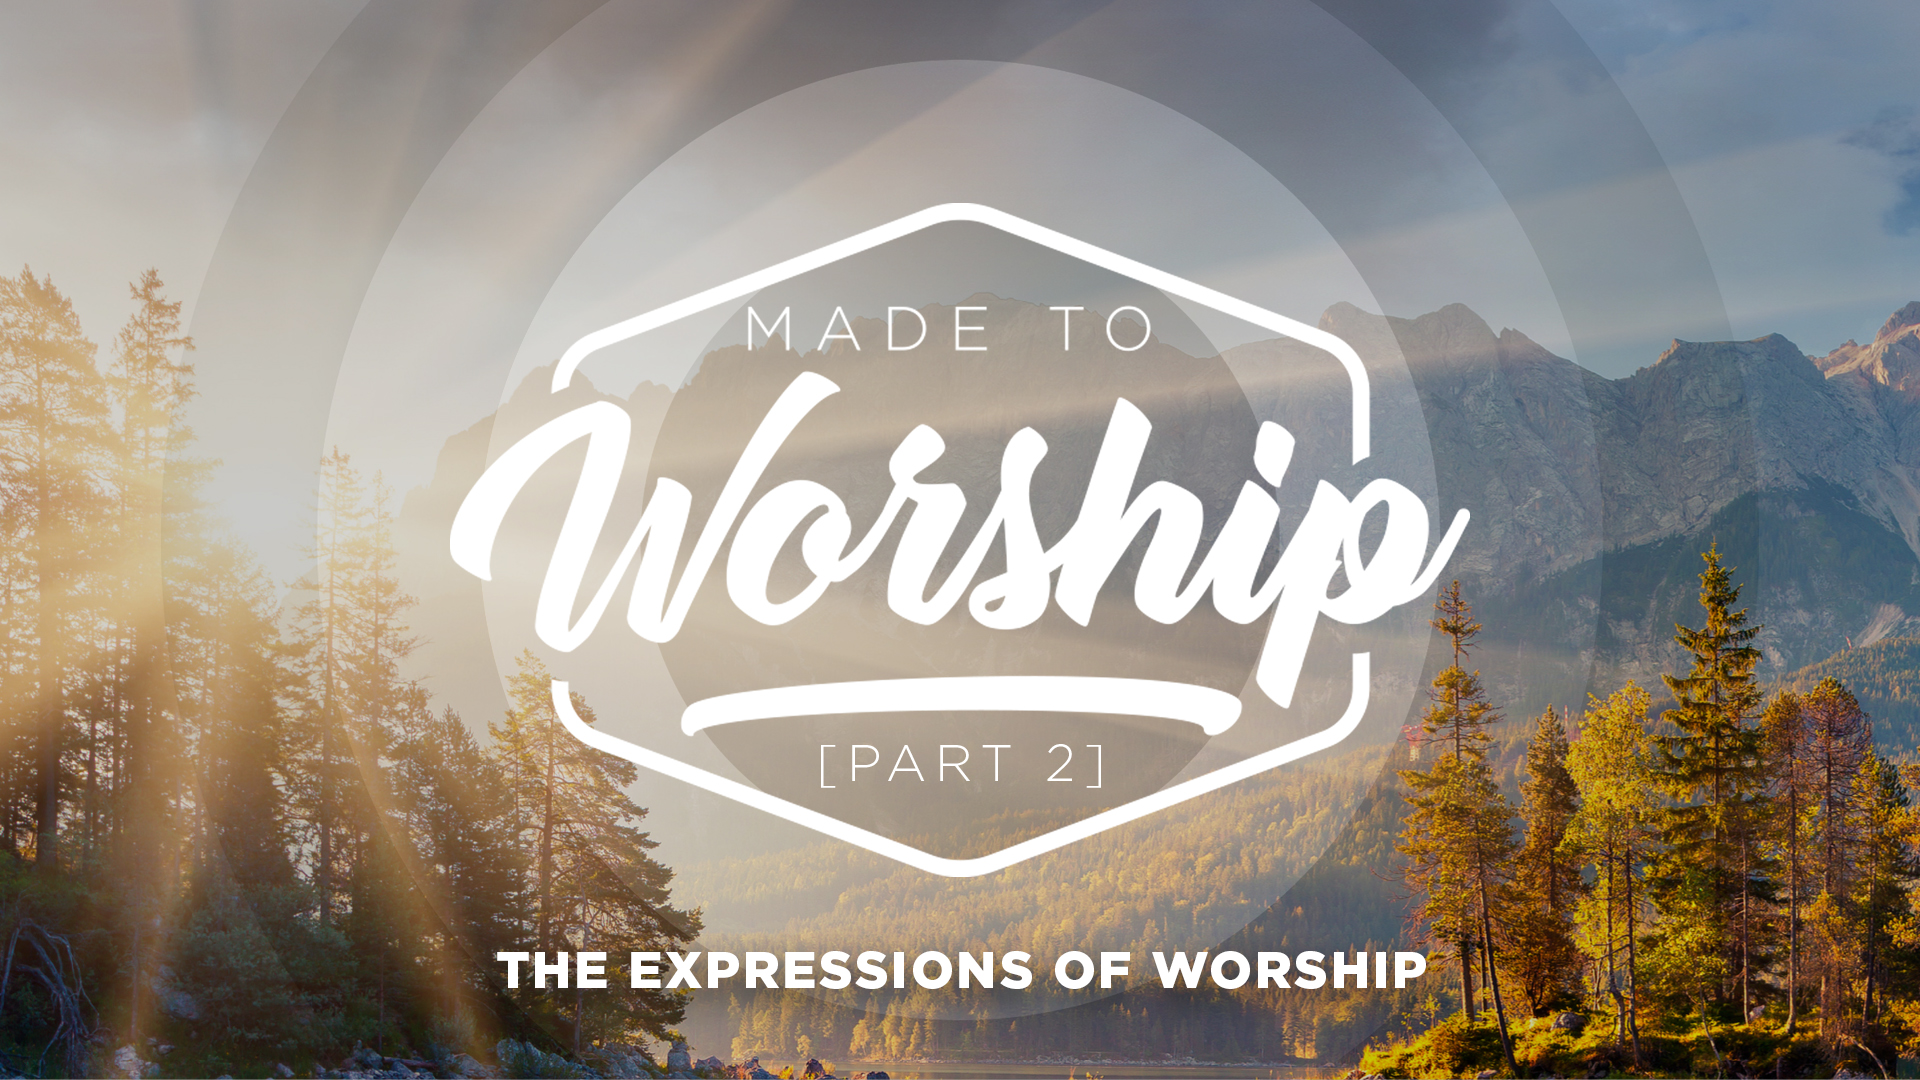 Part 2: The Expressions Of Worship